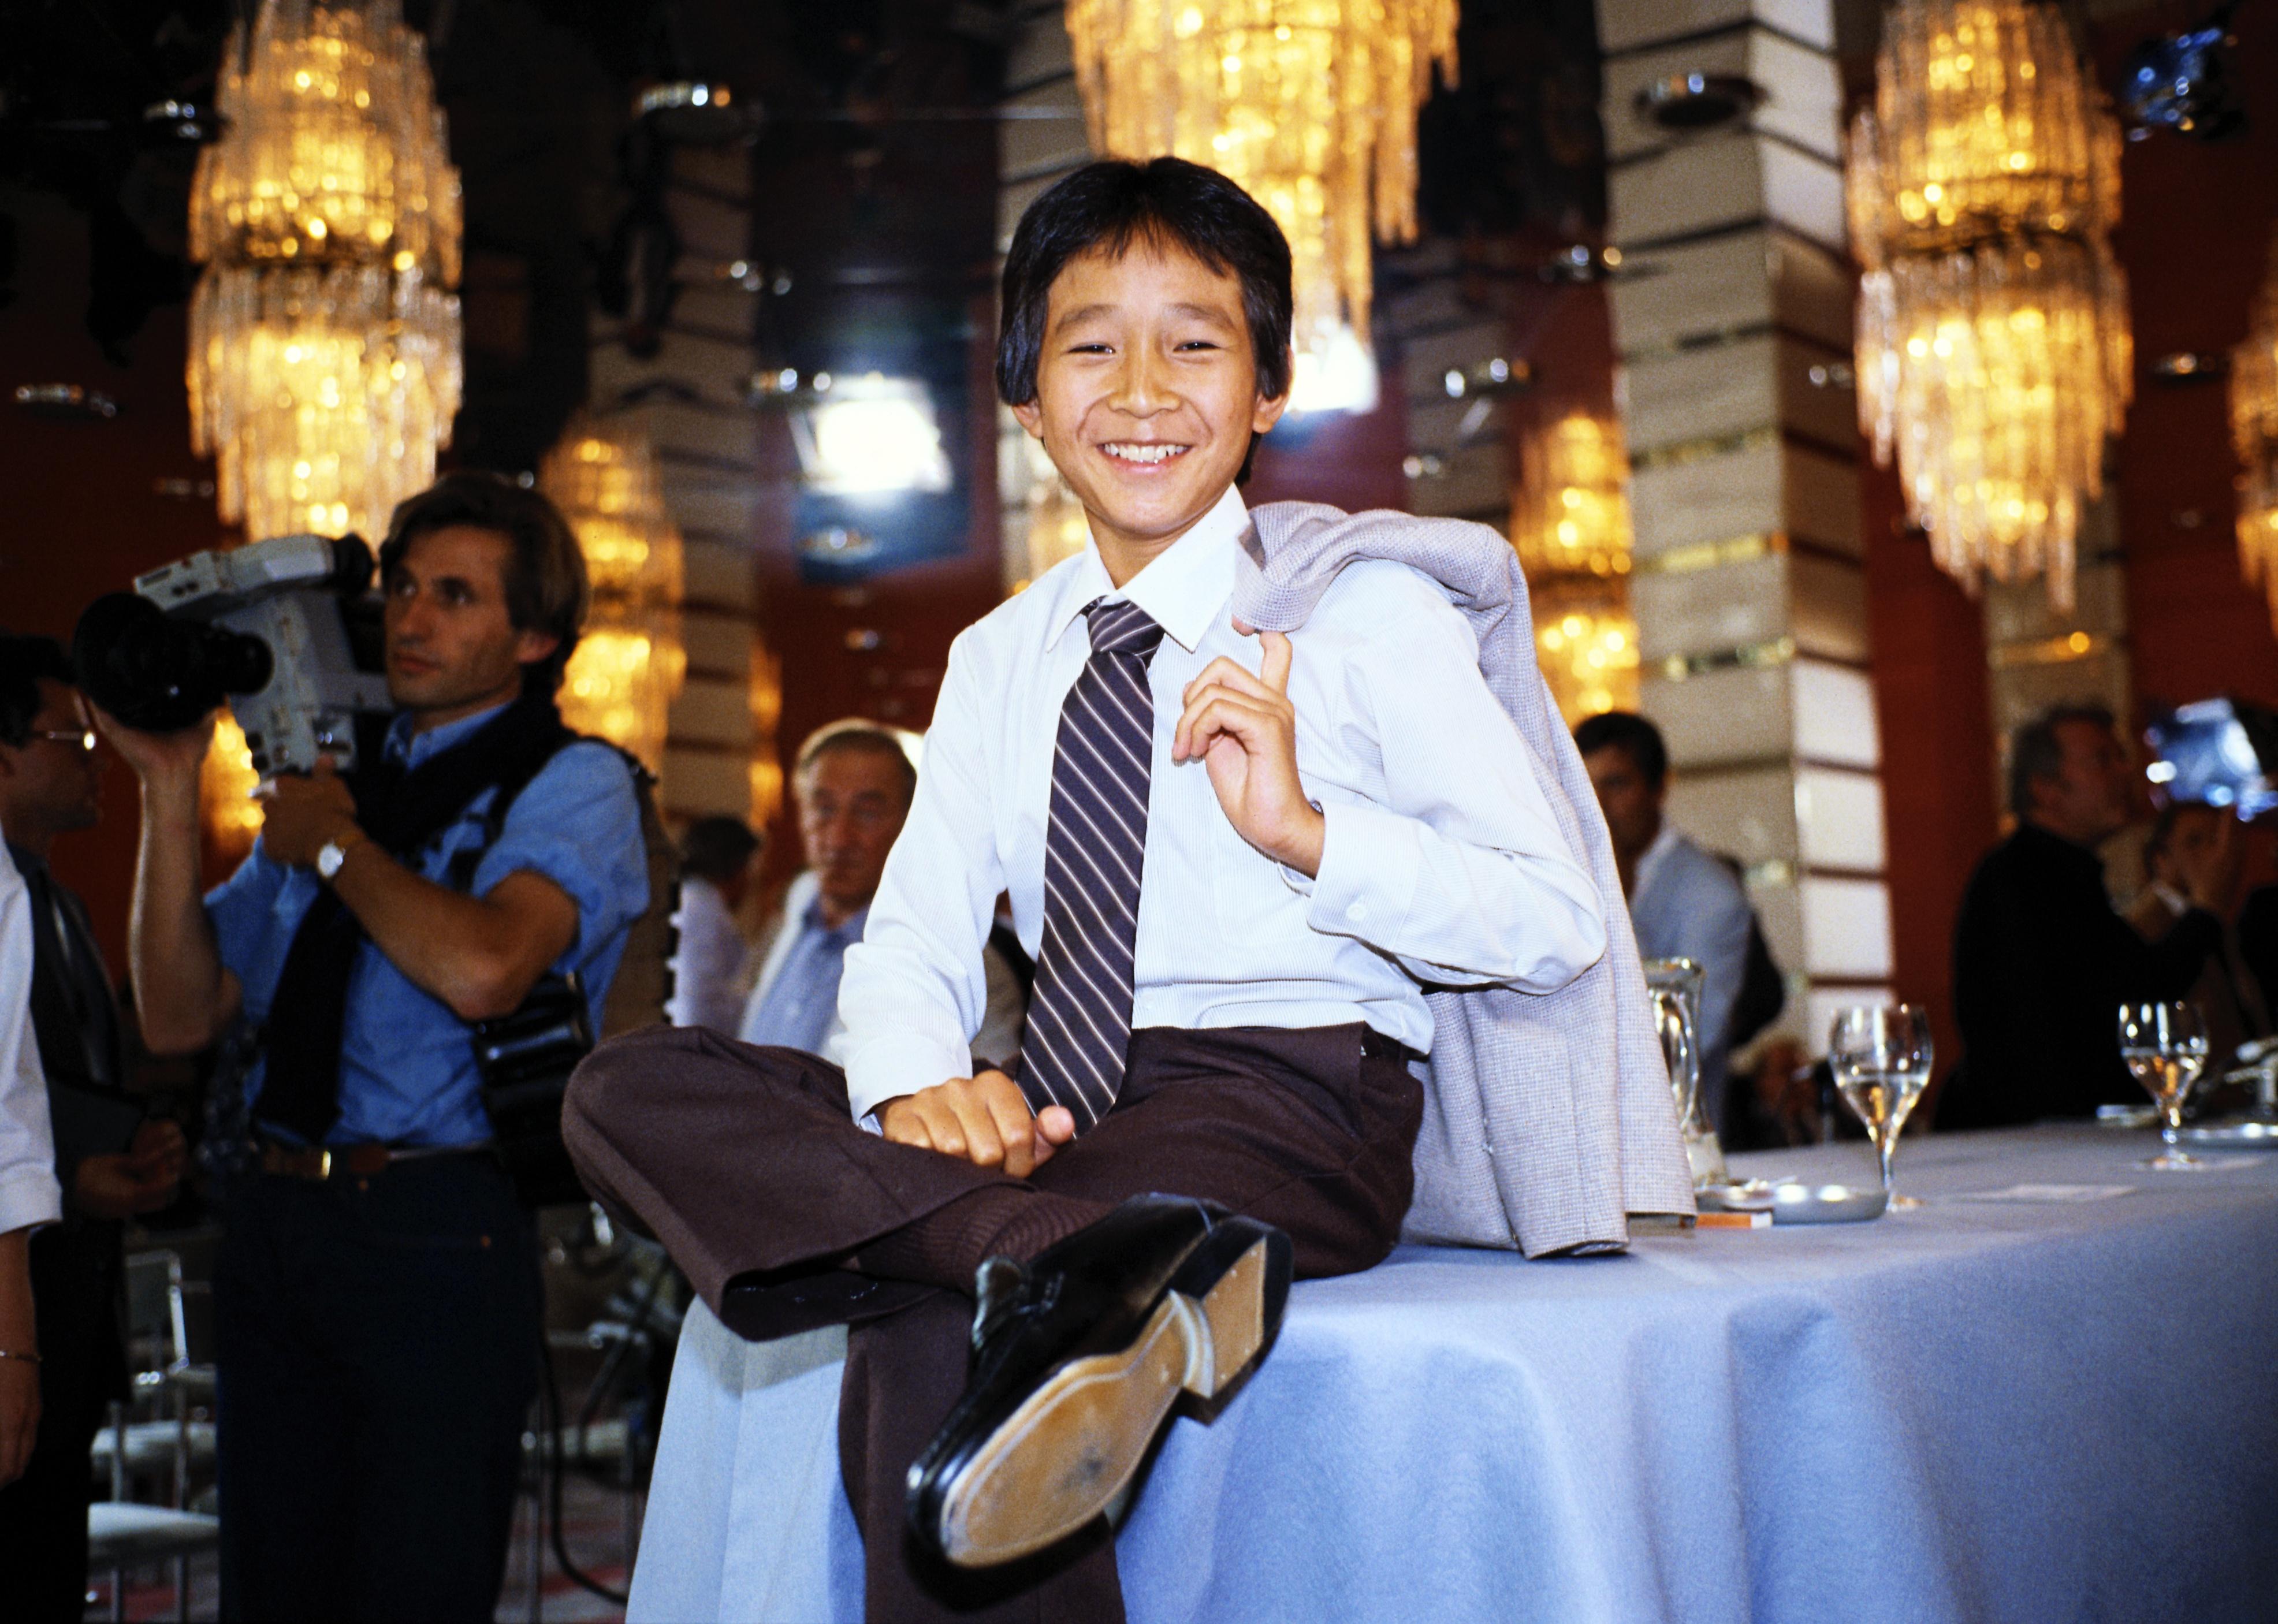 Ke Huy Quan in a suit sitting on a table.